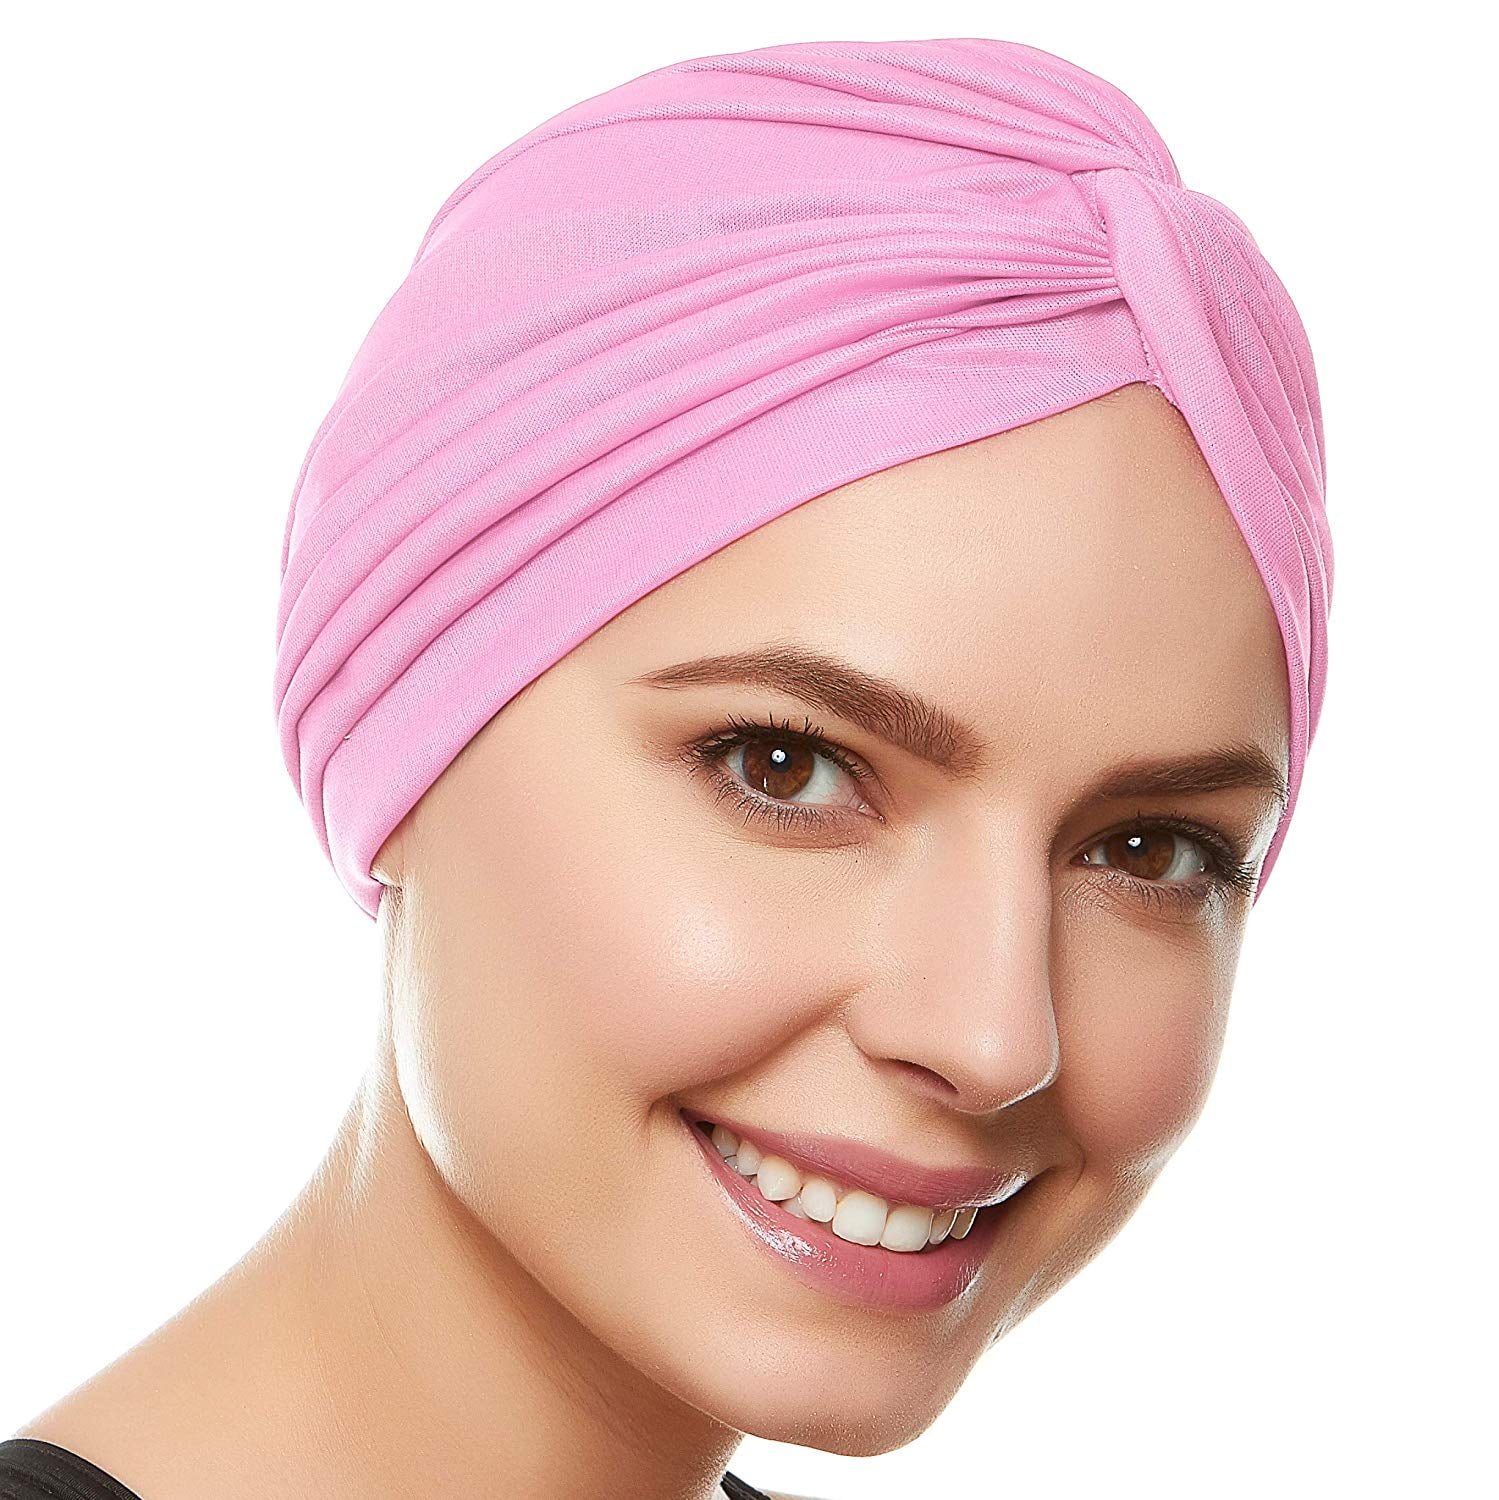 Head Cover for Ladies/Women Swim/Bathing Turban/Cap-Great for Cancer/Chemo Thera 